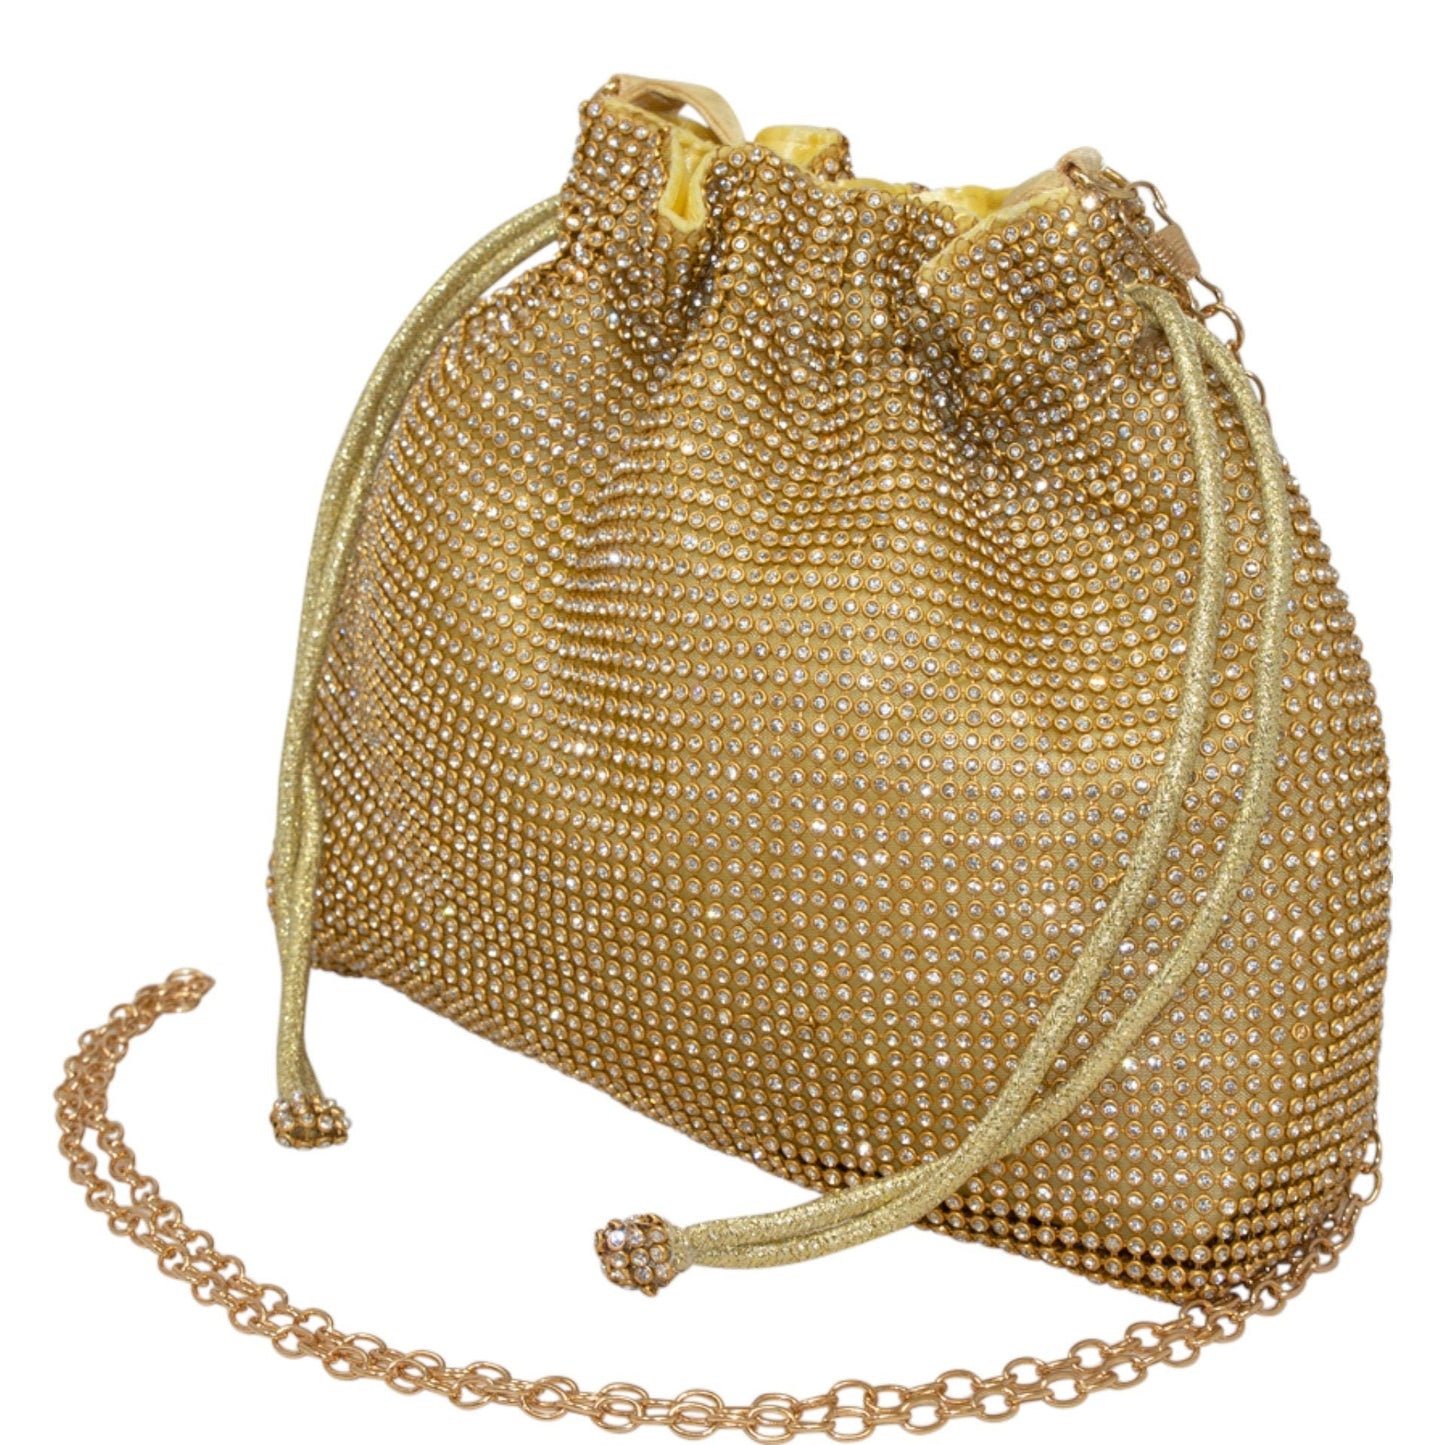 Sparkly Gold Draw String Shoulder Bag perfect eye-catching  gold handbag Gift For Her Bridesmaid Gift Wedding Clutch Bag Gold Clutch Bag